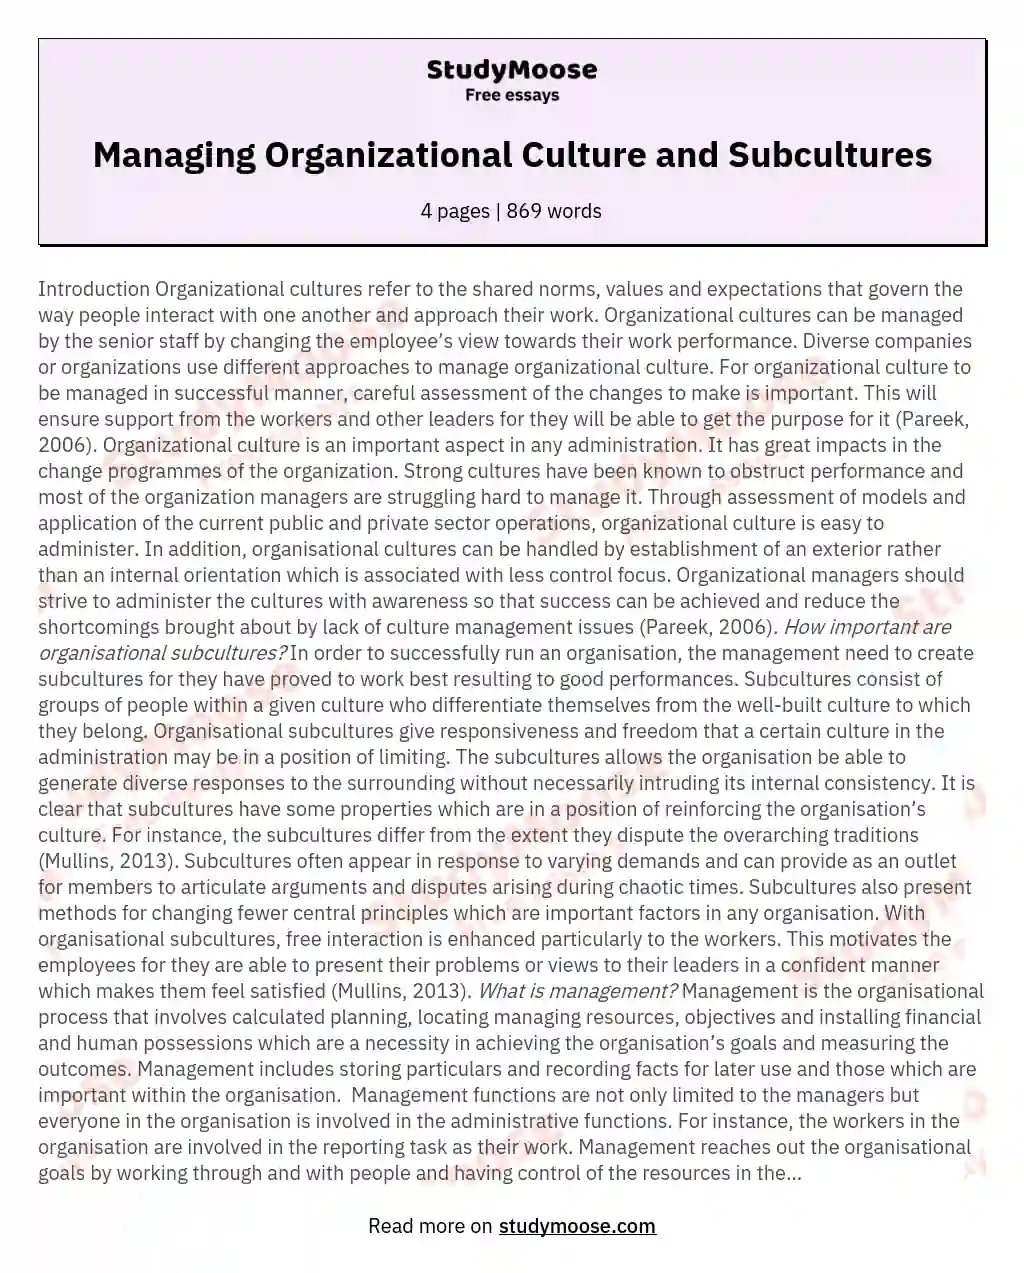 Managing Organizational Culture and Subcultures essay